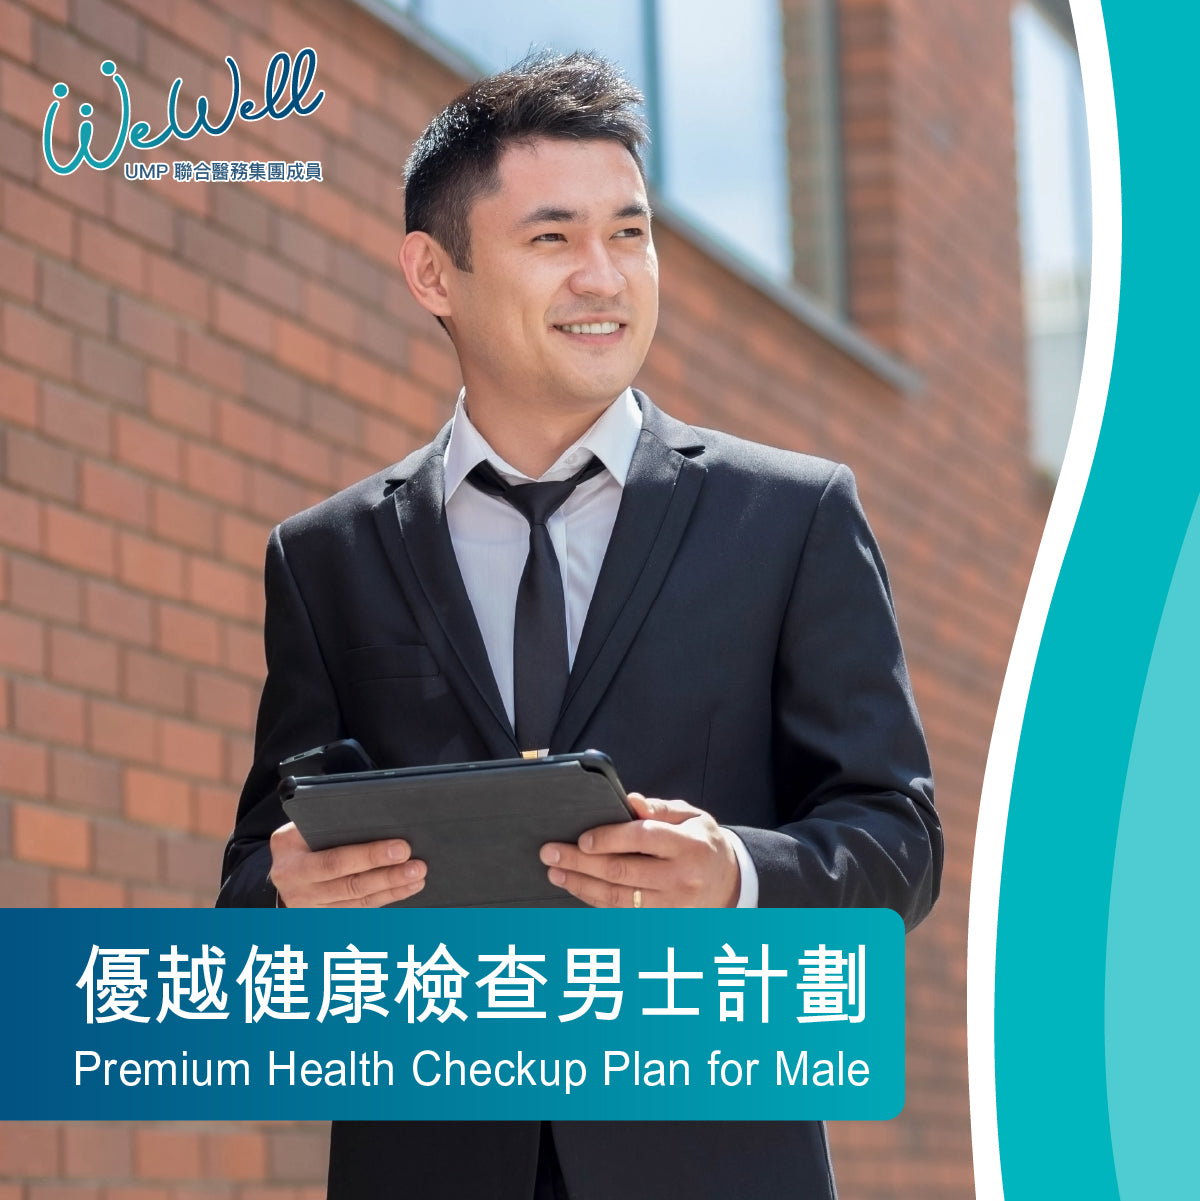 Premium Health Check-up Plan for Male